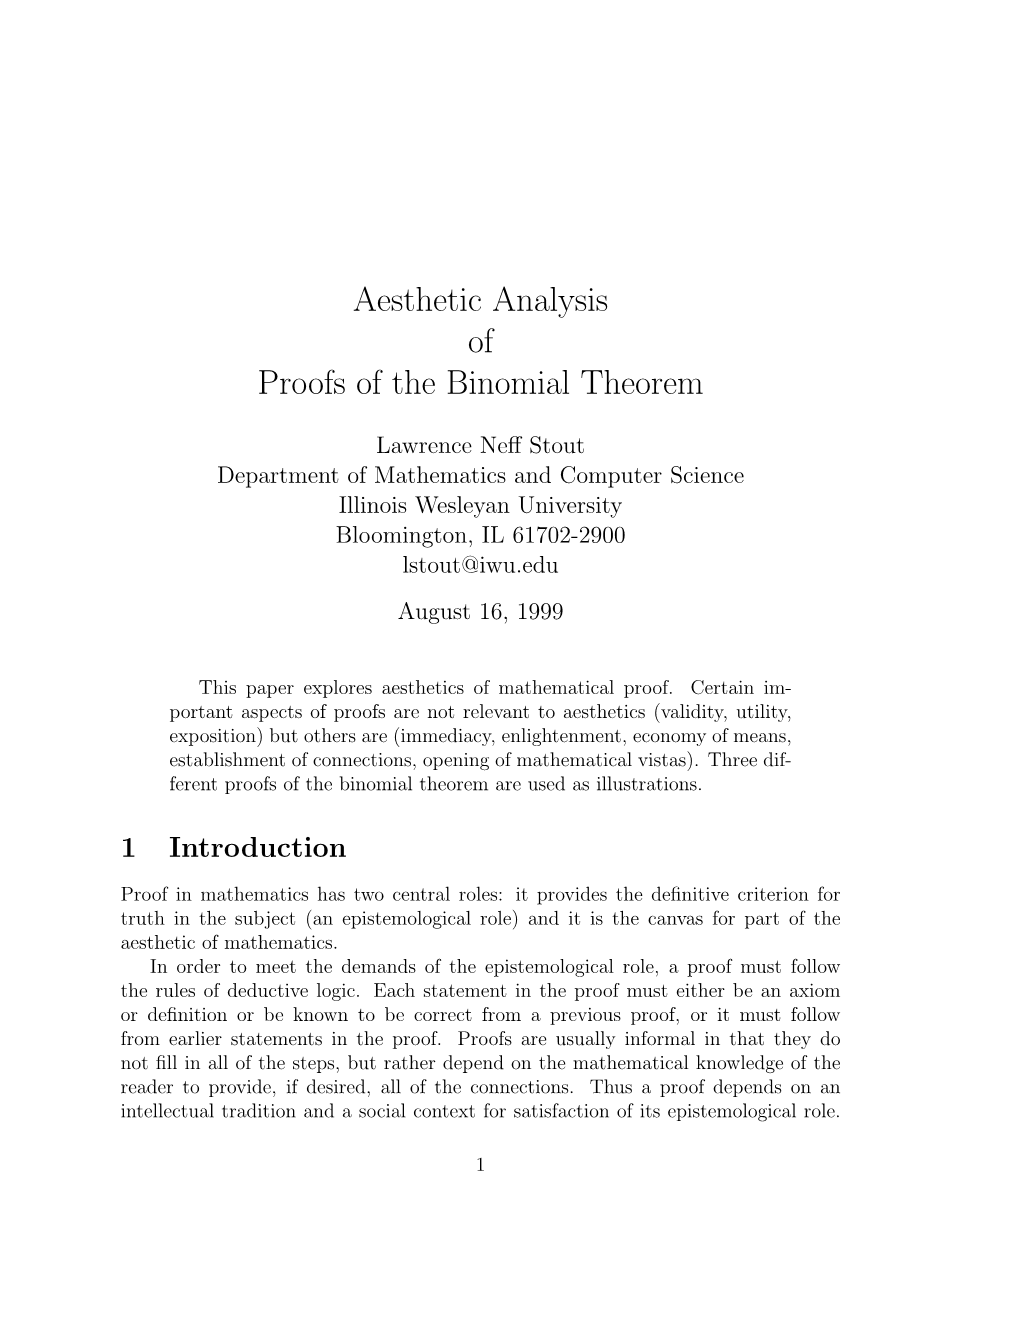 Aesthetic Analysis of Proofs of the Binomial Theorem